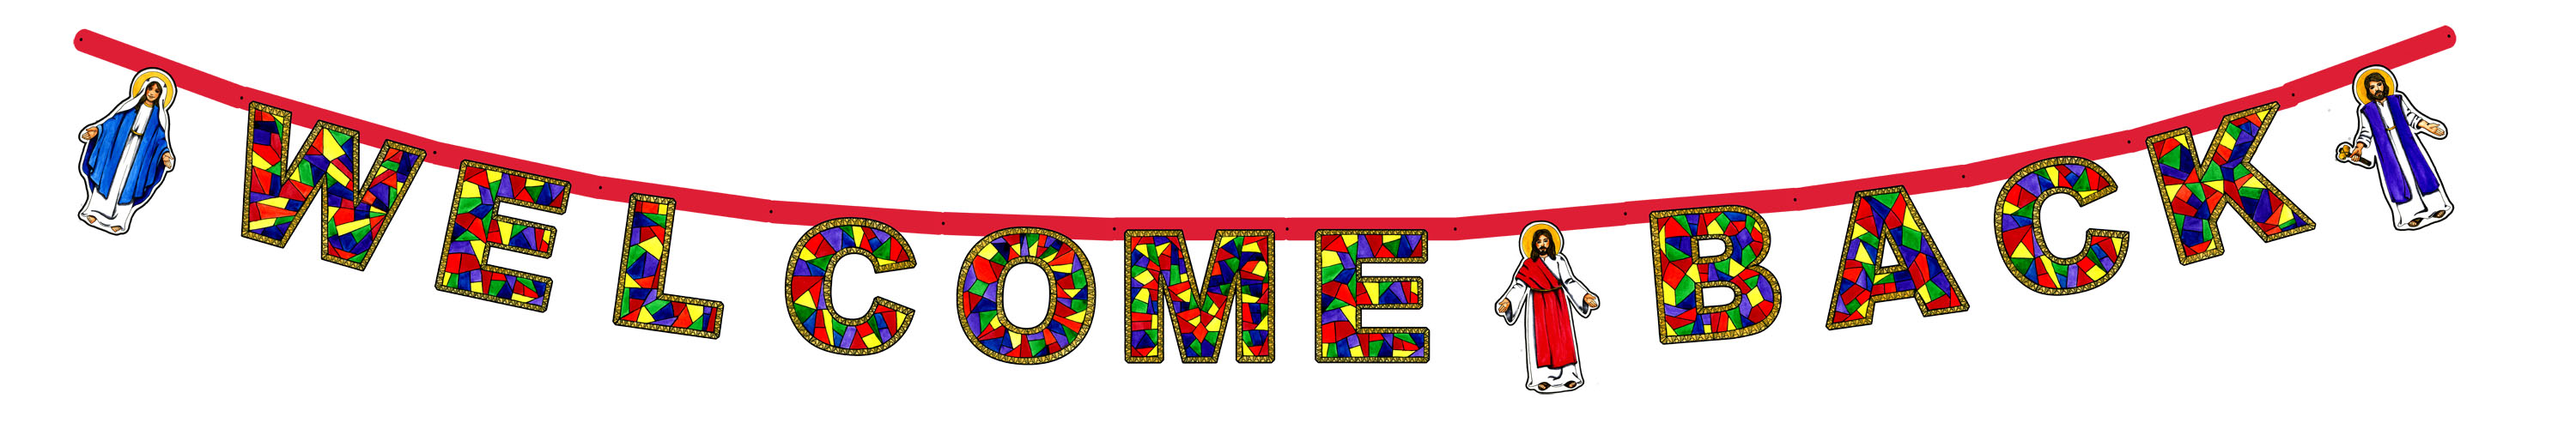 Welcome Back Banner Clipart - Free Clip Art Images